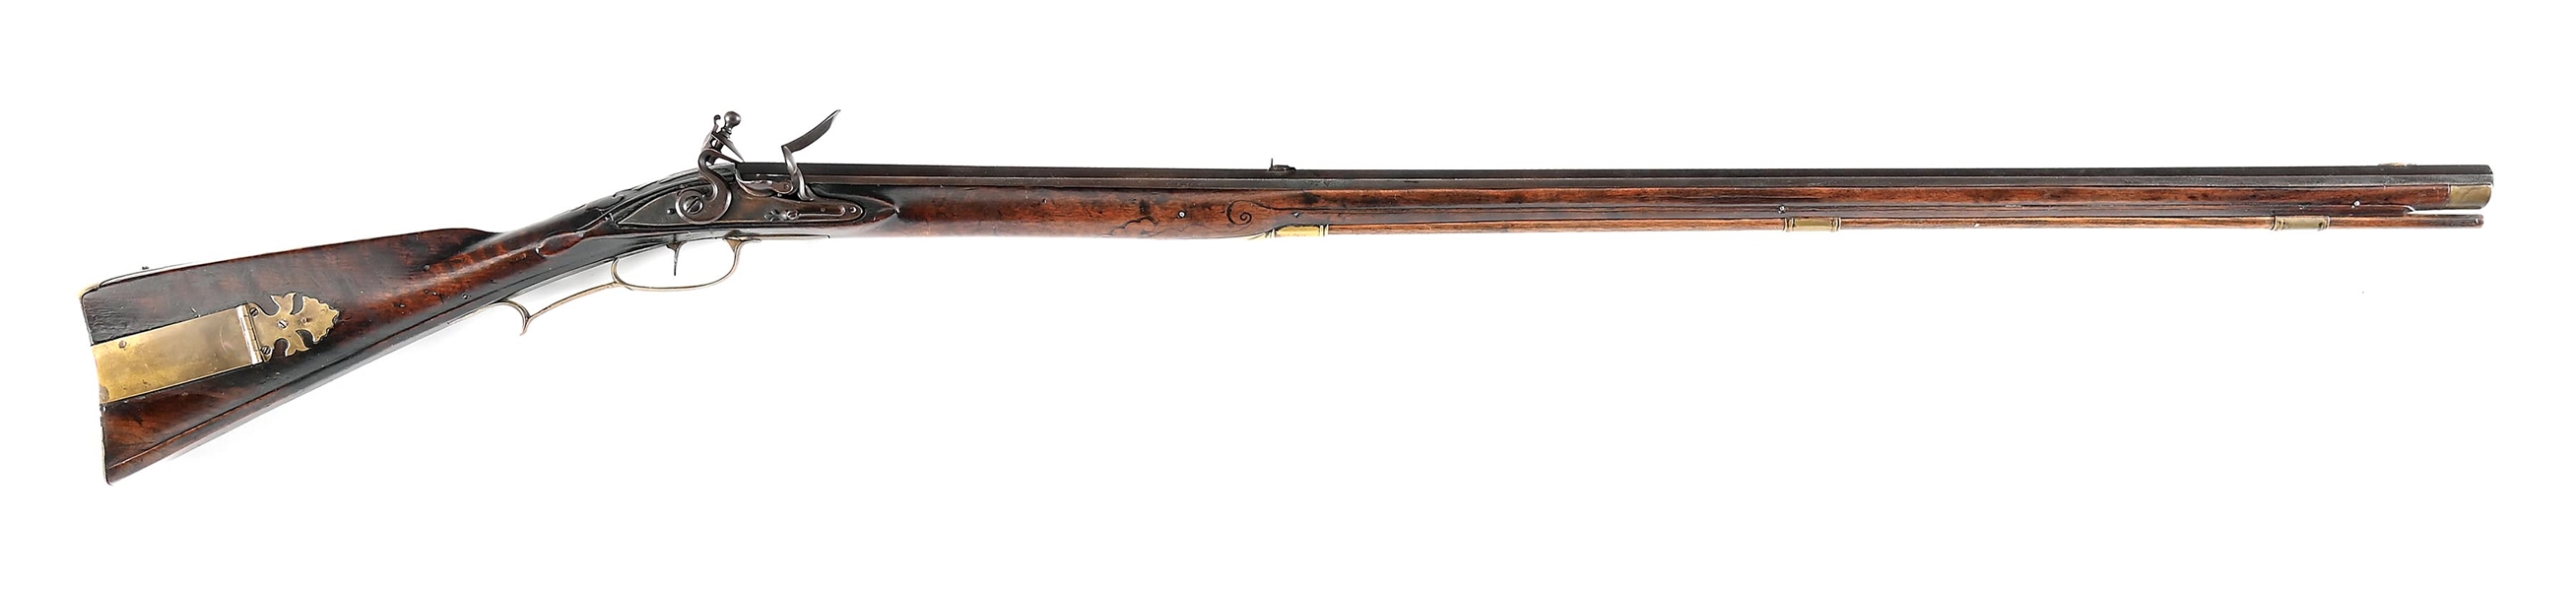 (A) FINE INCISE CARVED FLINTLOCK KENTUCKY RIFLE ATTRIBUTED TO GEORGE SCHROYER SENIOR.